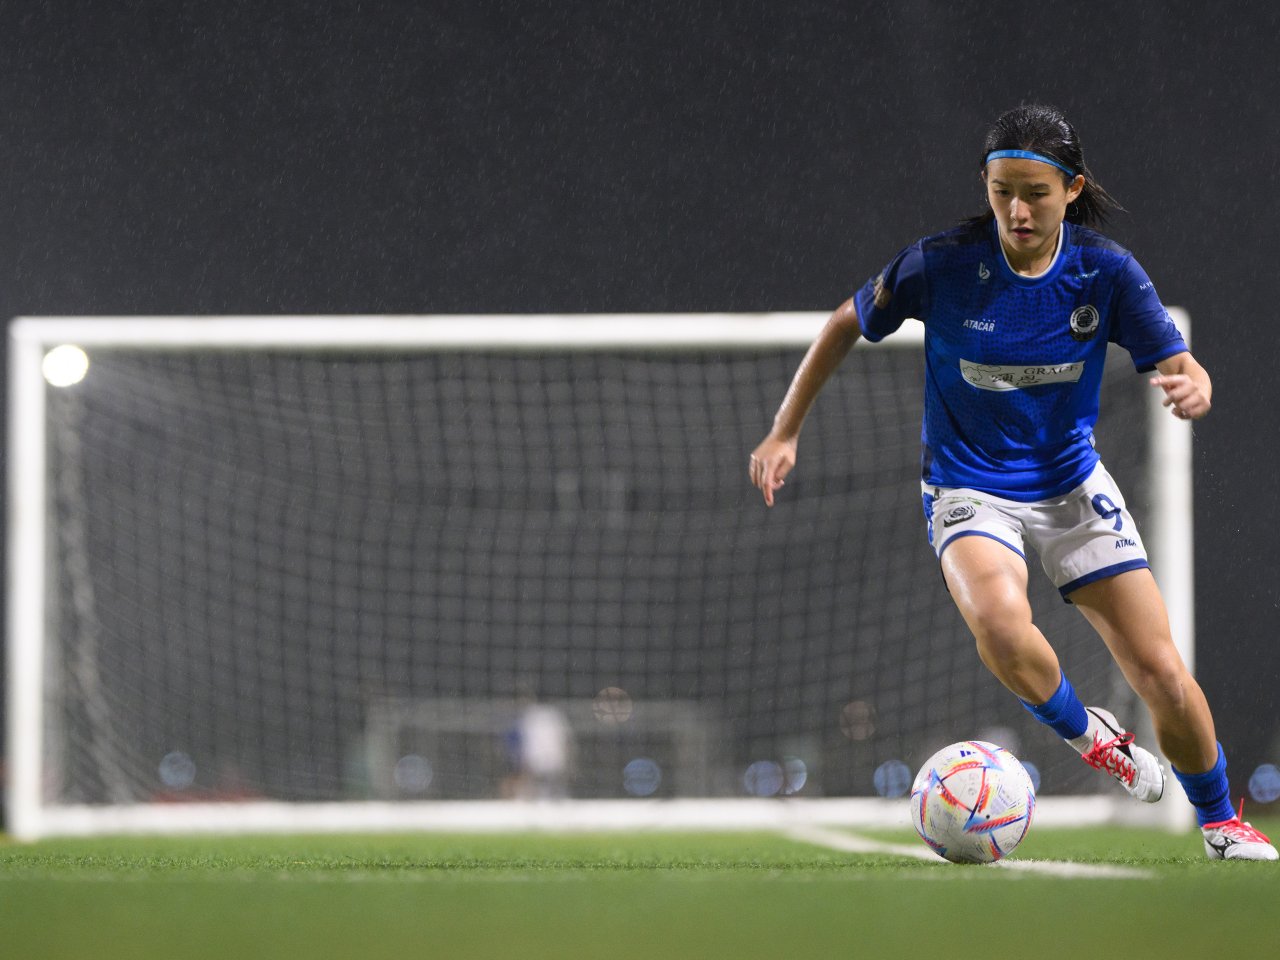 She shoots, she scores: footballers fight to go pro